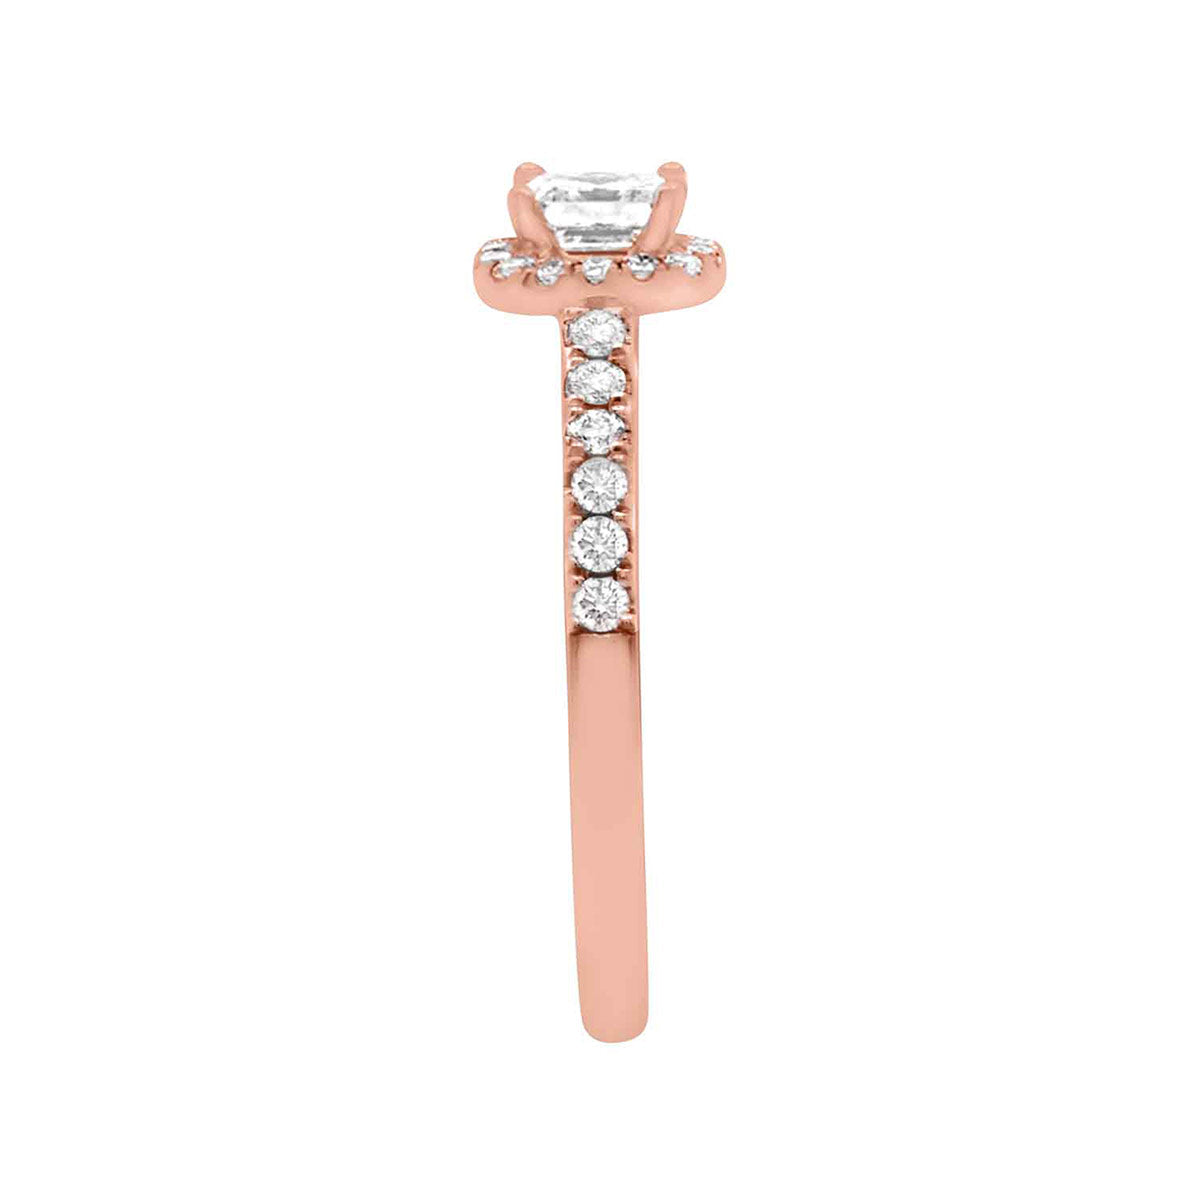 Asscher Halo Diamond Ring in rose gold pictured from a sideview